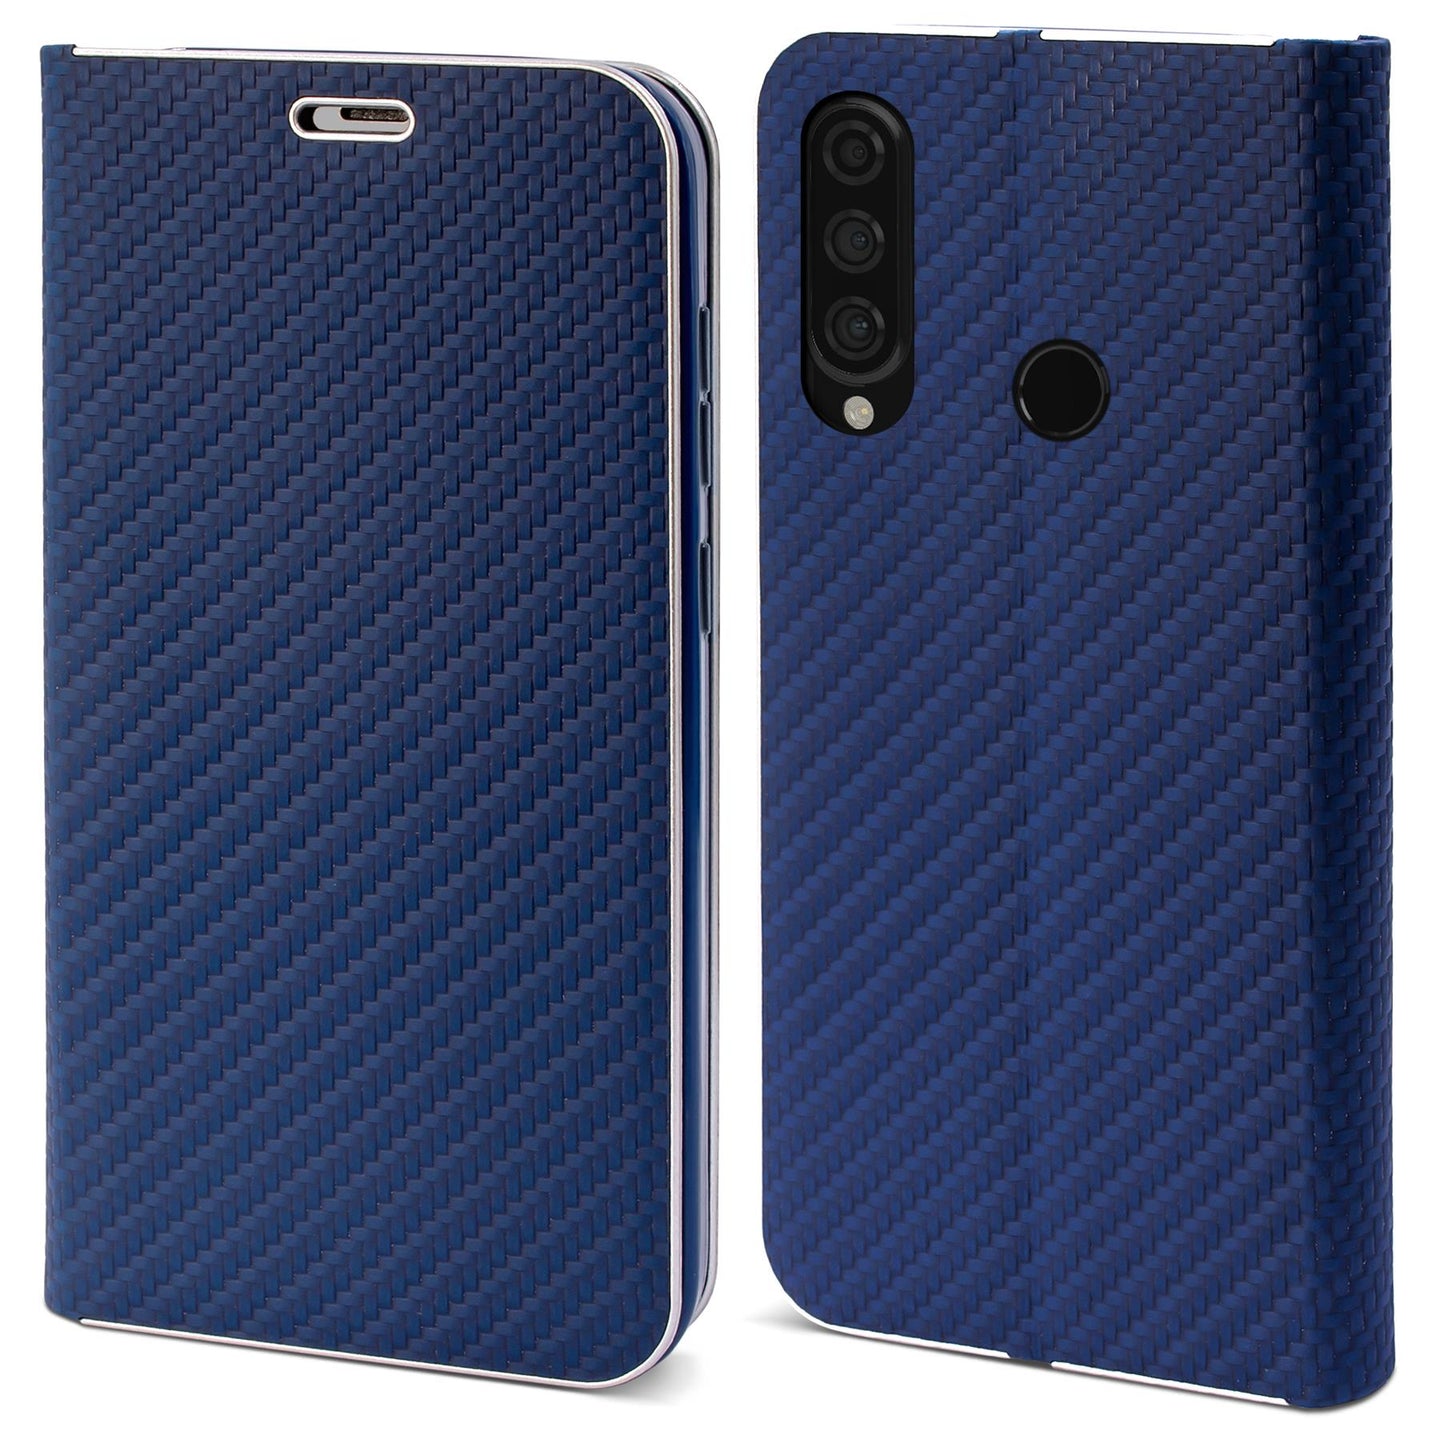 Moozy Wallet Case for Huawei P30 Lite, Dark Blue Carbon – Metallic Edge Protection Magnetic Closure Flip Cover with Card Holder